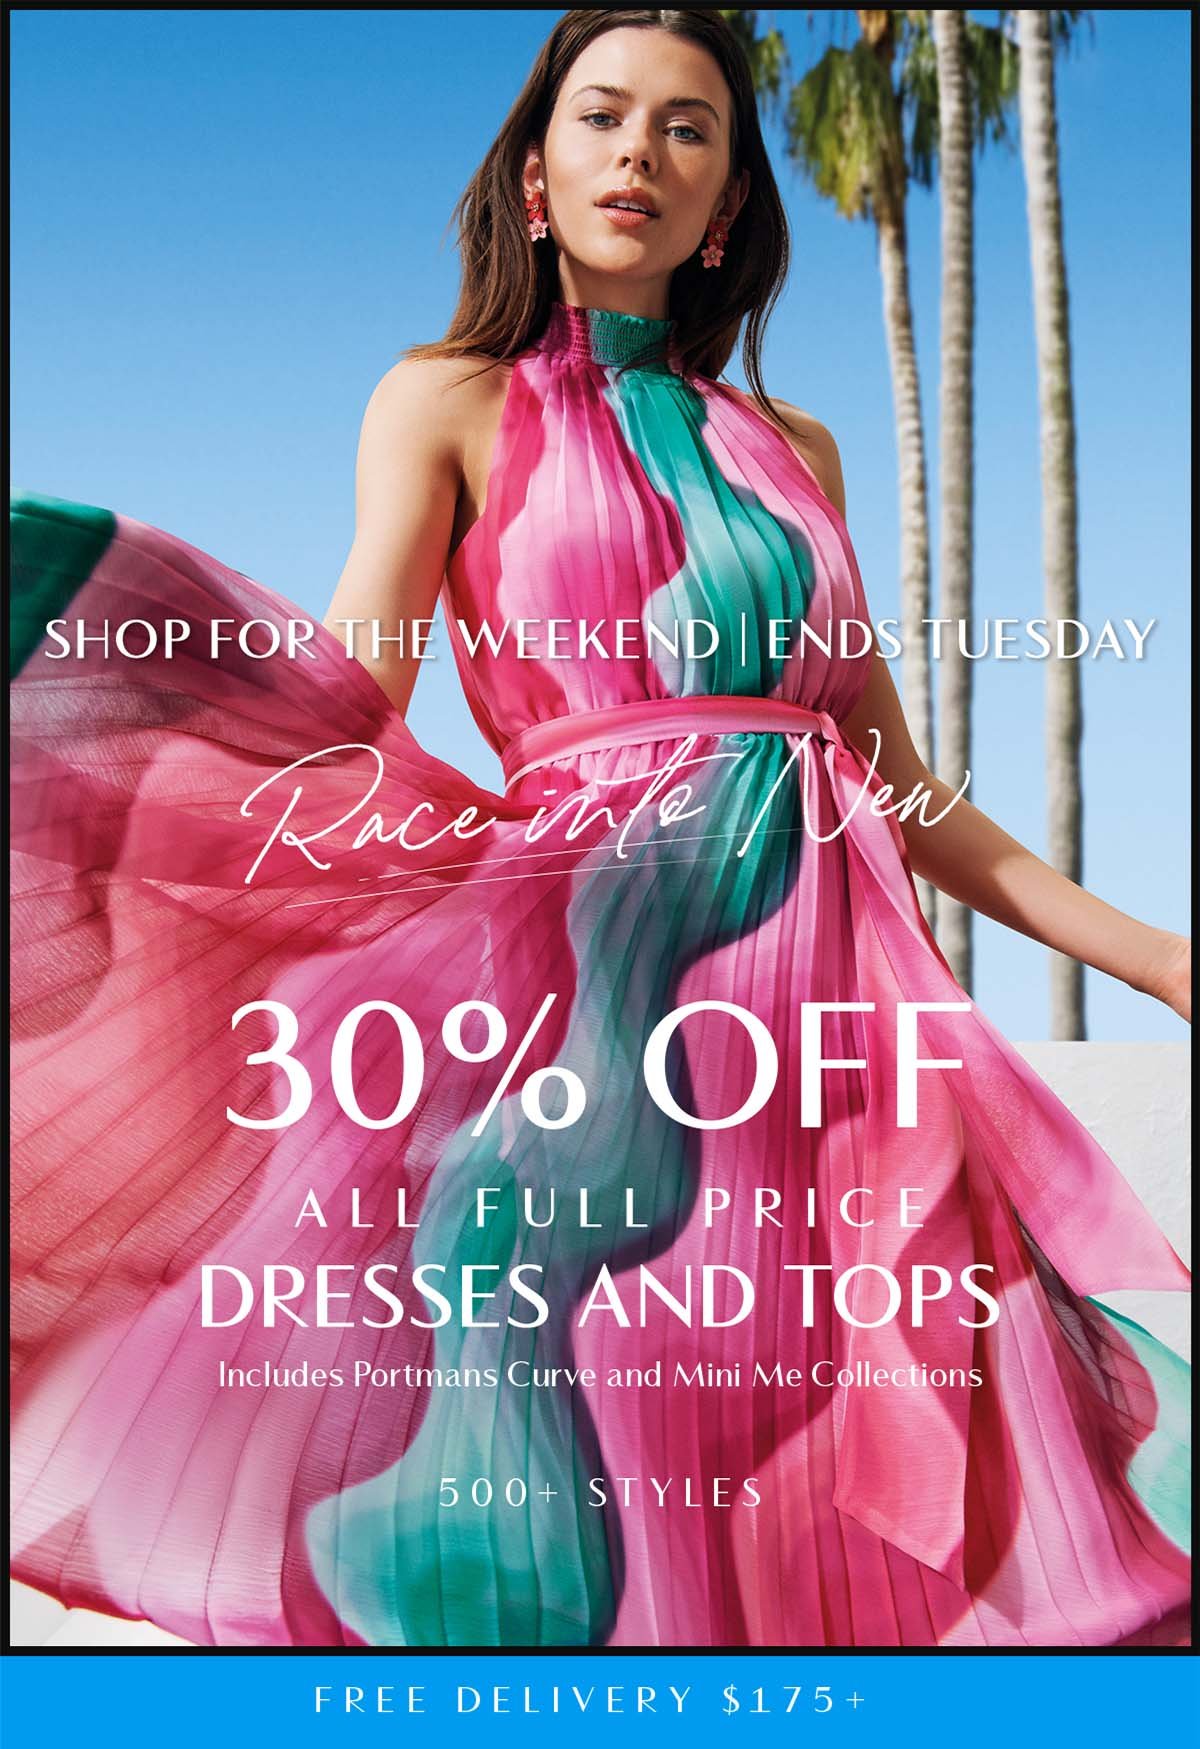 Race Into New. 30% Off All Full Price Dresses & Tops 